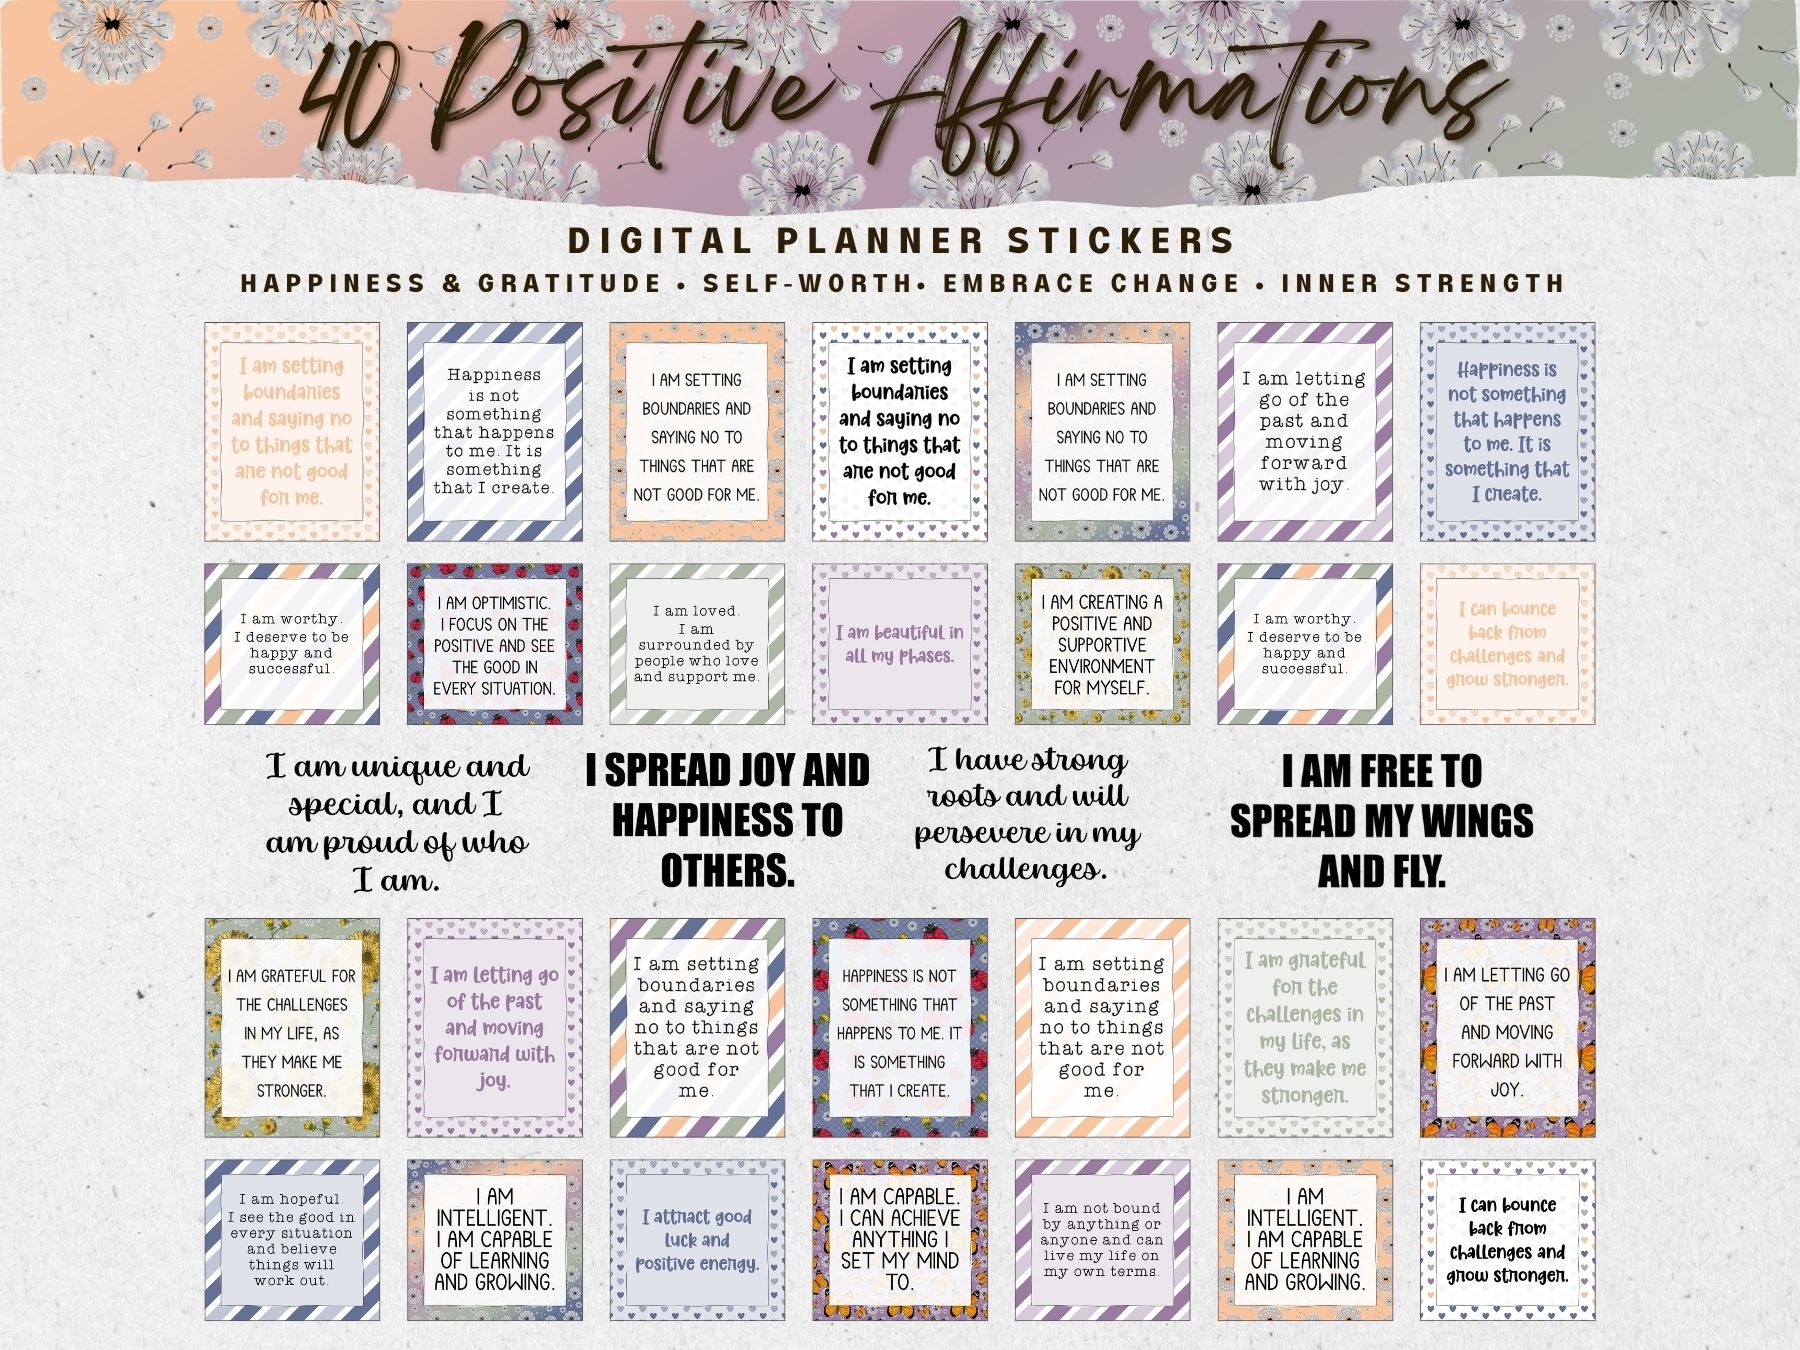 positive affirmation card digital stickers for digital journal and digital planners to boost self esteem and live happier life.